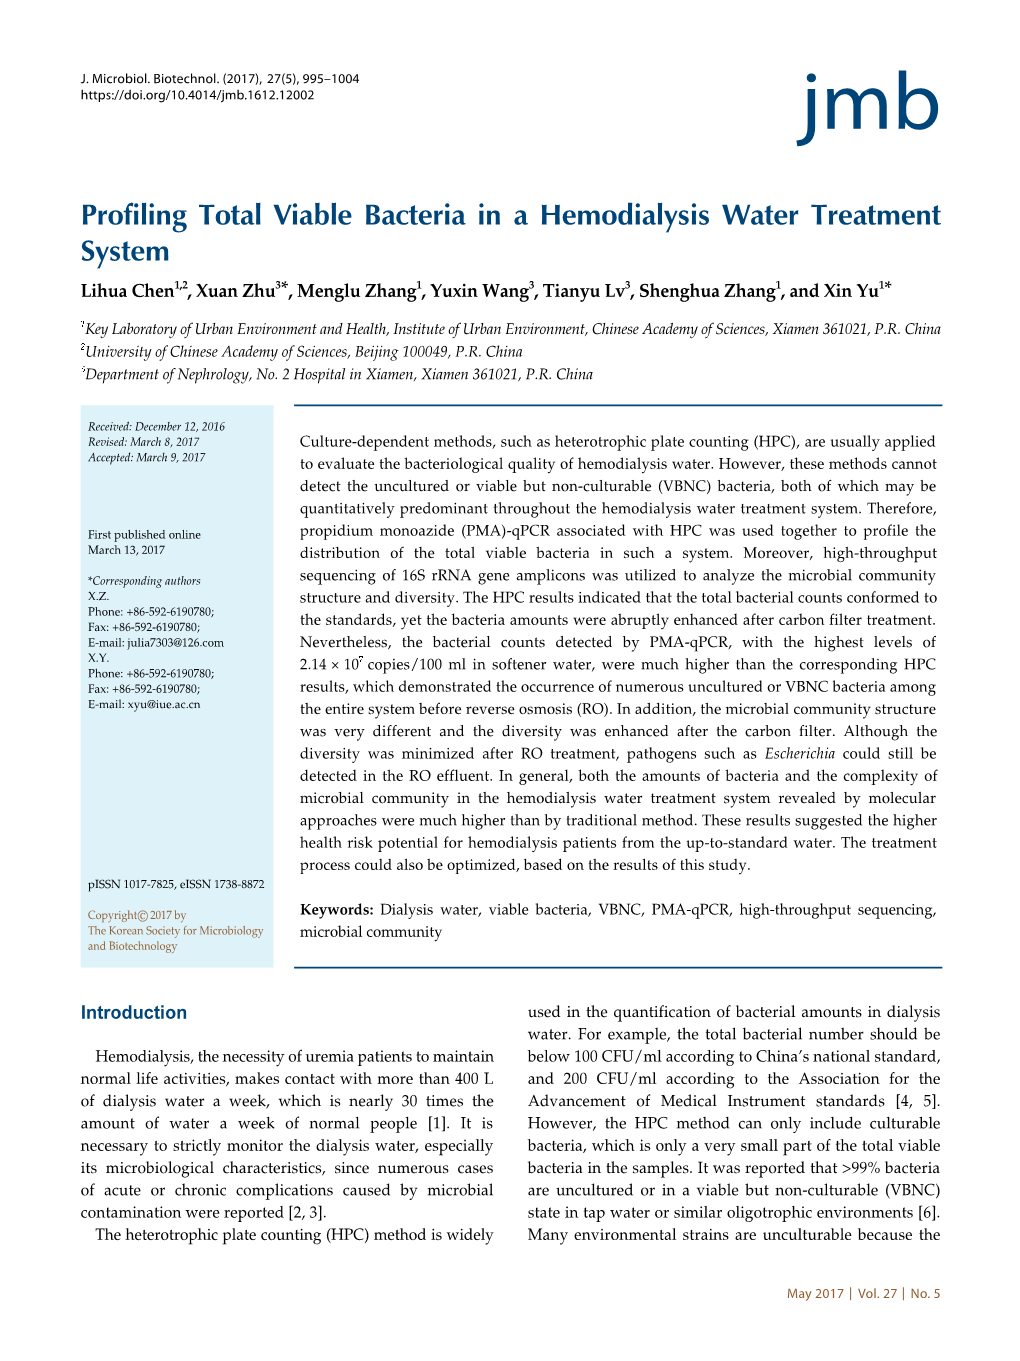 Profiling Total Viable Bacteria in a Hemodialysis Water Treatment